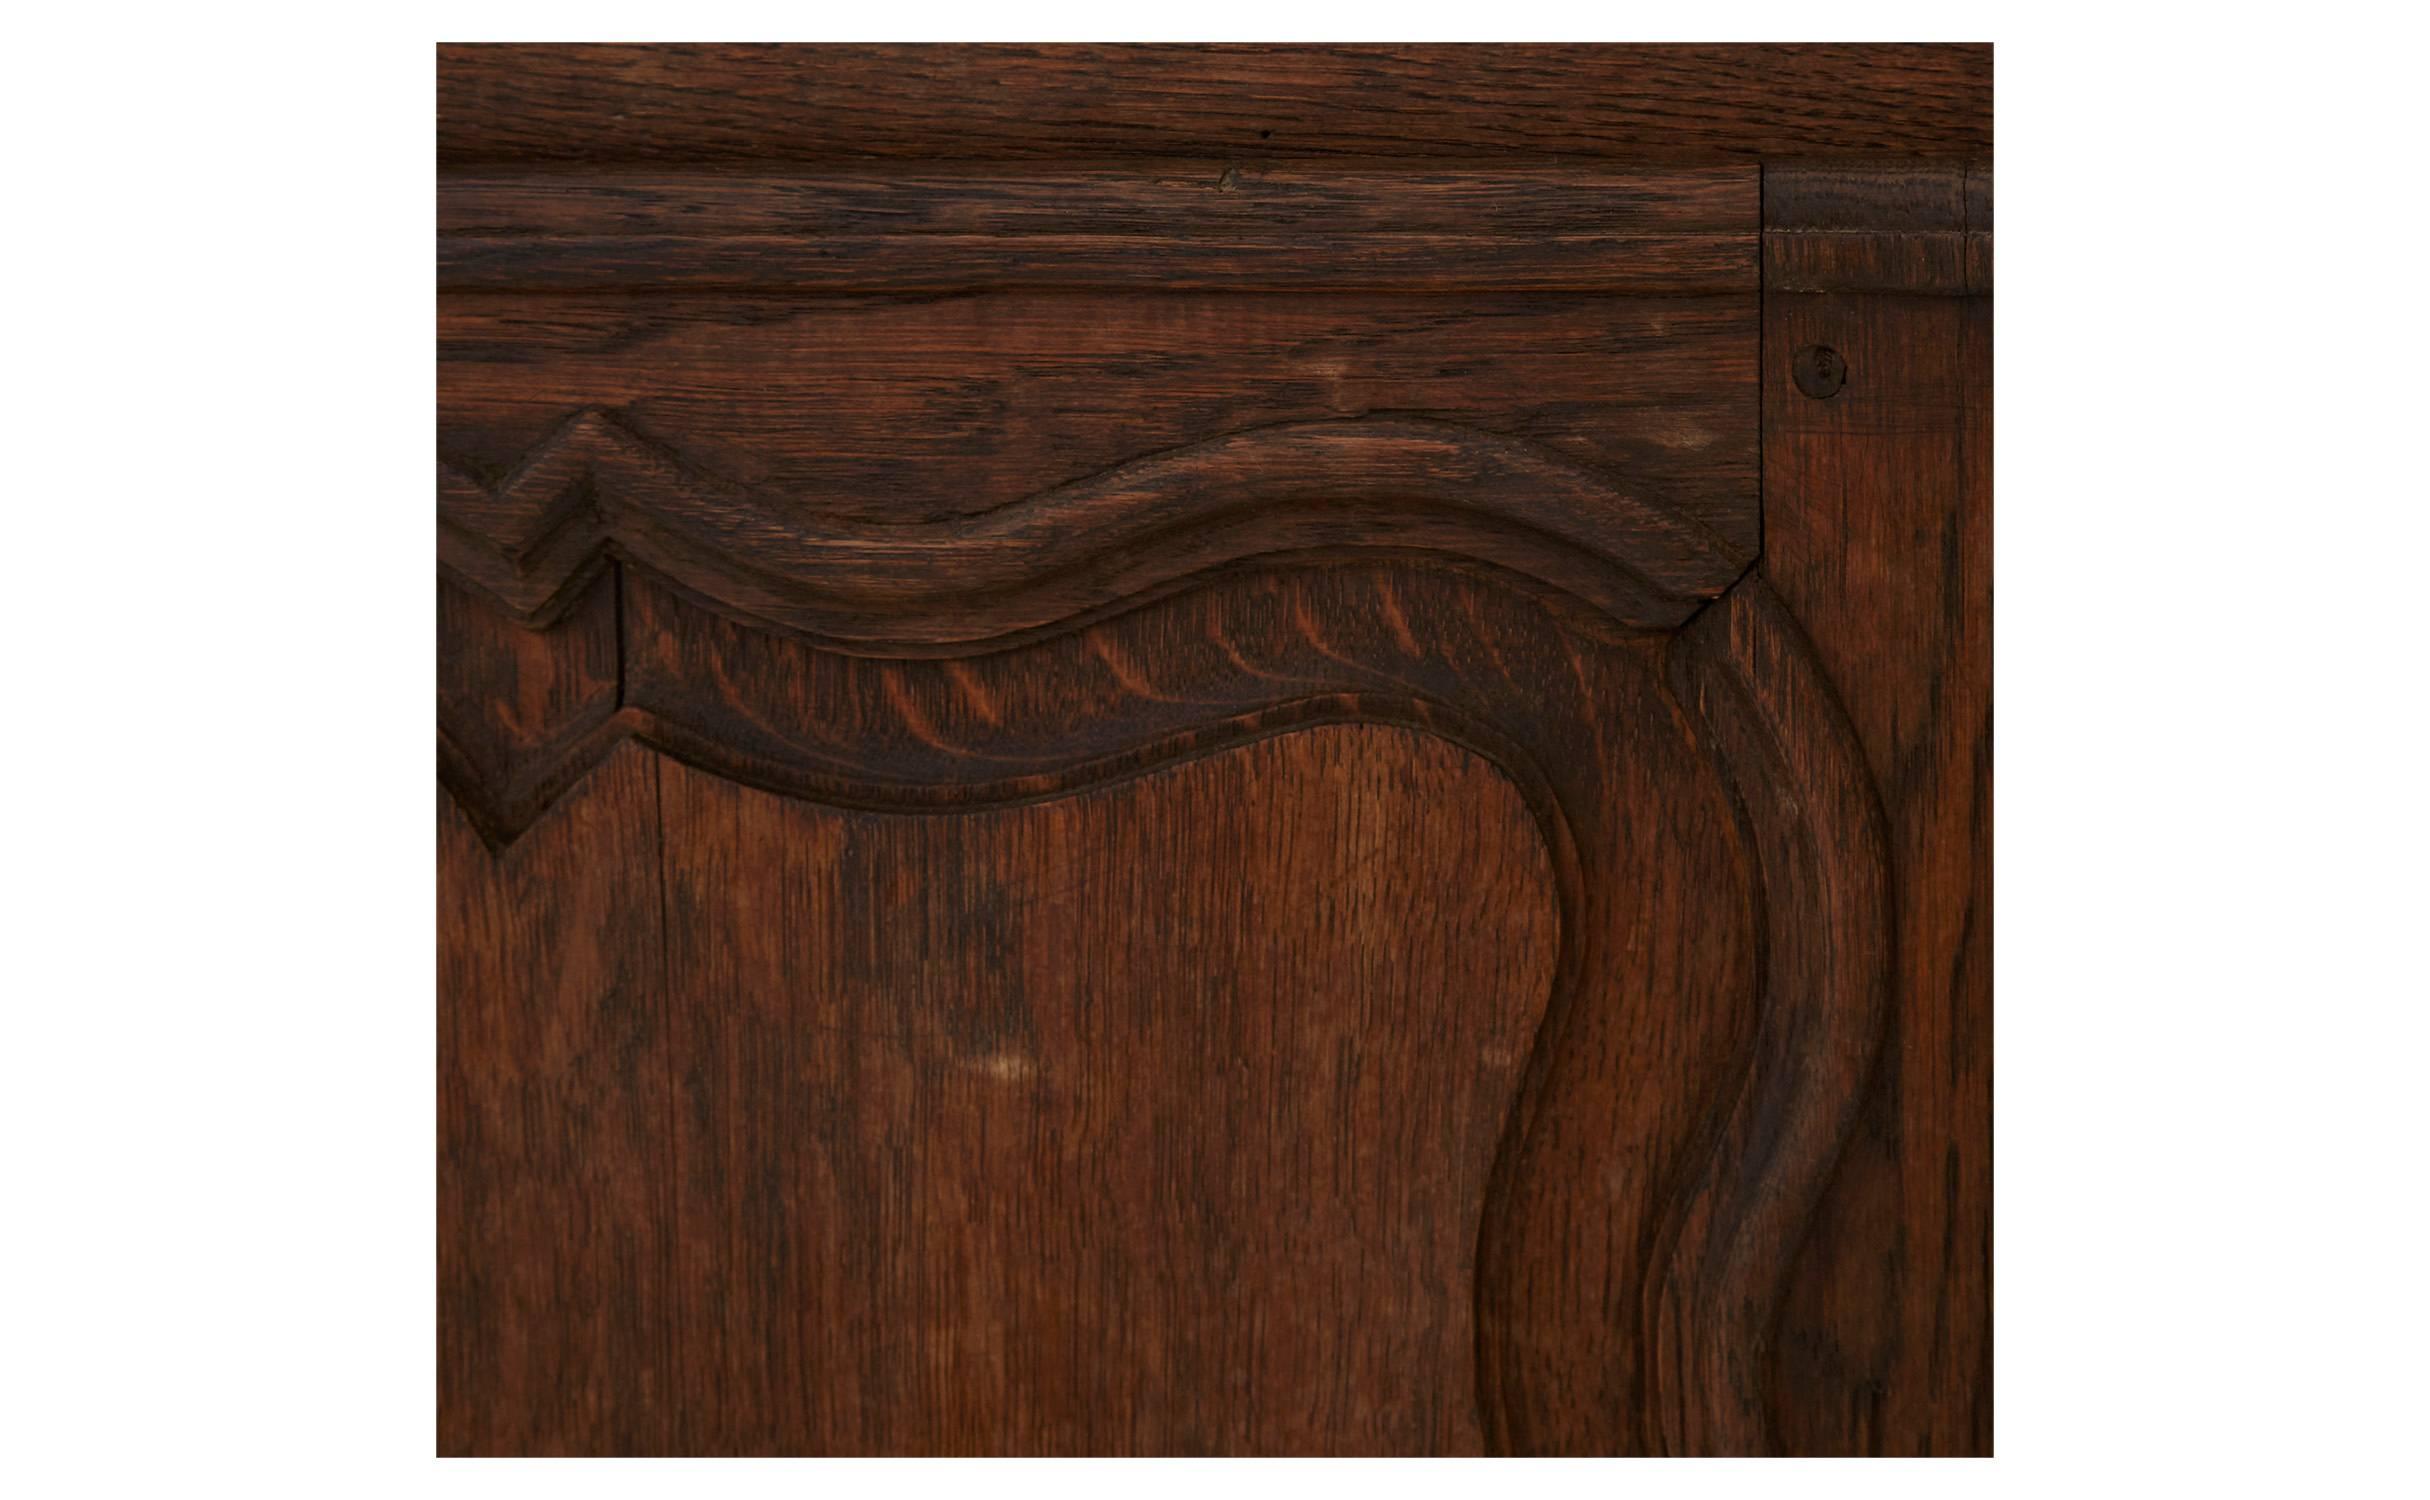 •Oak
•Drawers and shelves
•20th century
•Spain
•Measure: 17D x 23.5W x 35H